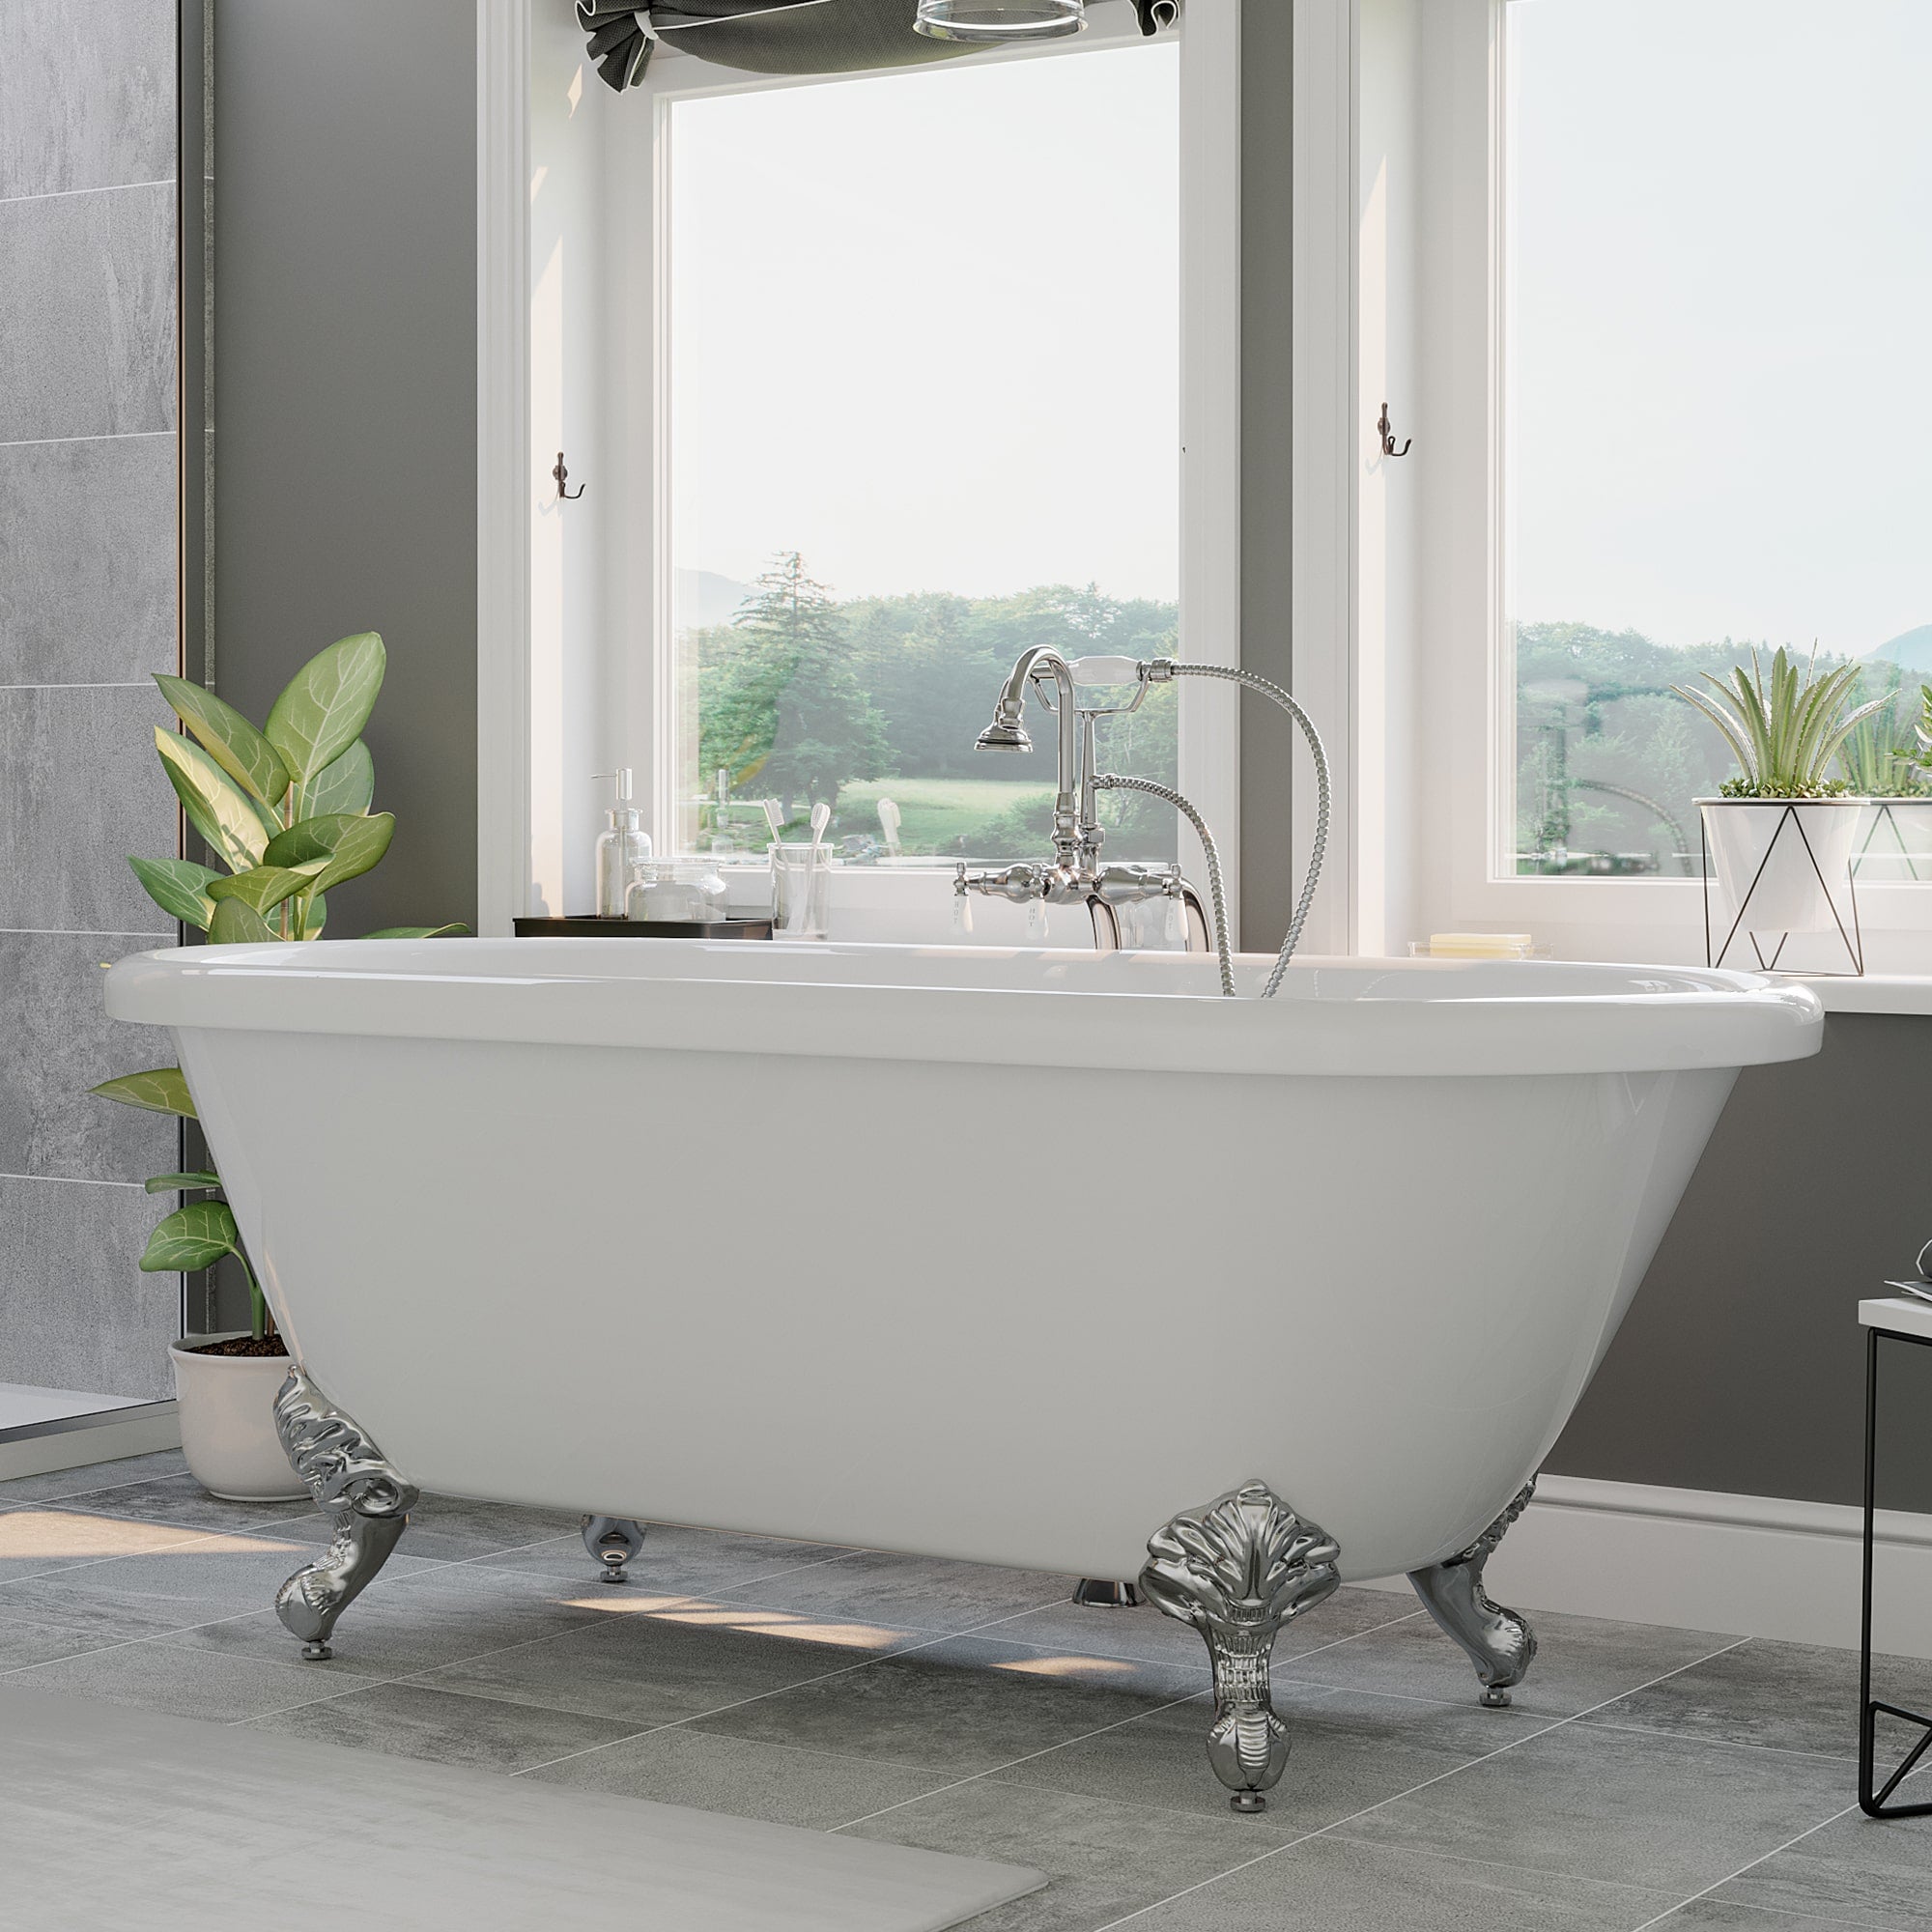 Cambridge Plumbing Double Ended Acrylic Clawfoot Soaking Tub (White Gloss Finish) and Complete Plumbing Package ADE-398684-PKG-NH - with brushed nickel ball and claw feet and brushed nickel plumbing package - In bathroom setting - Vital Hydrotherapy